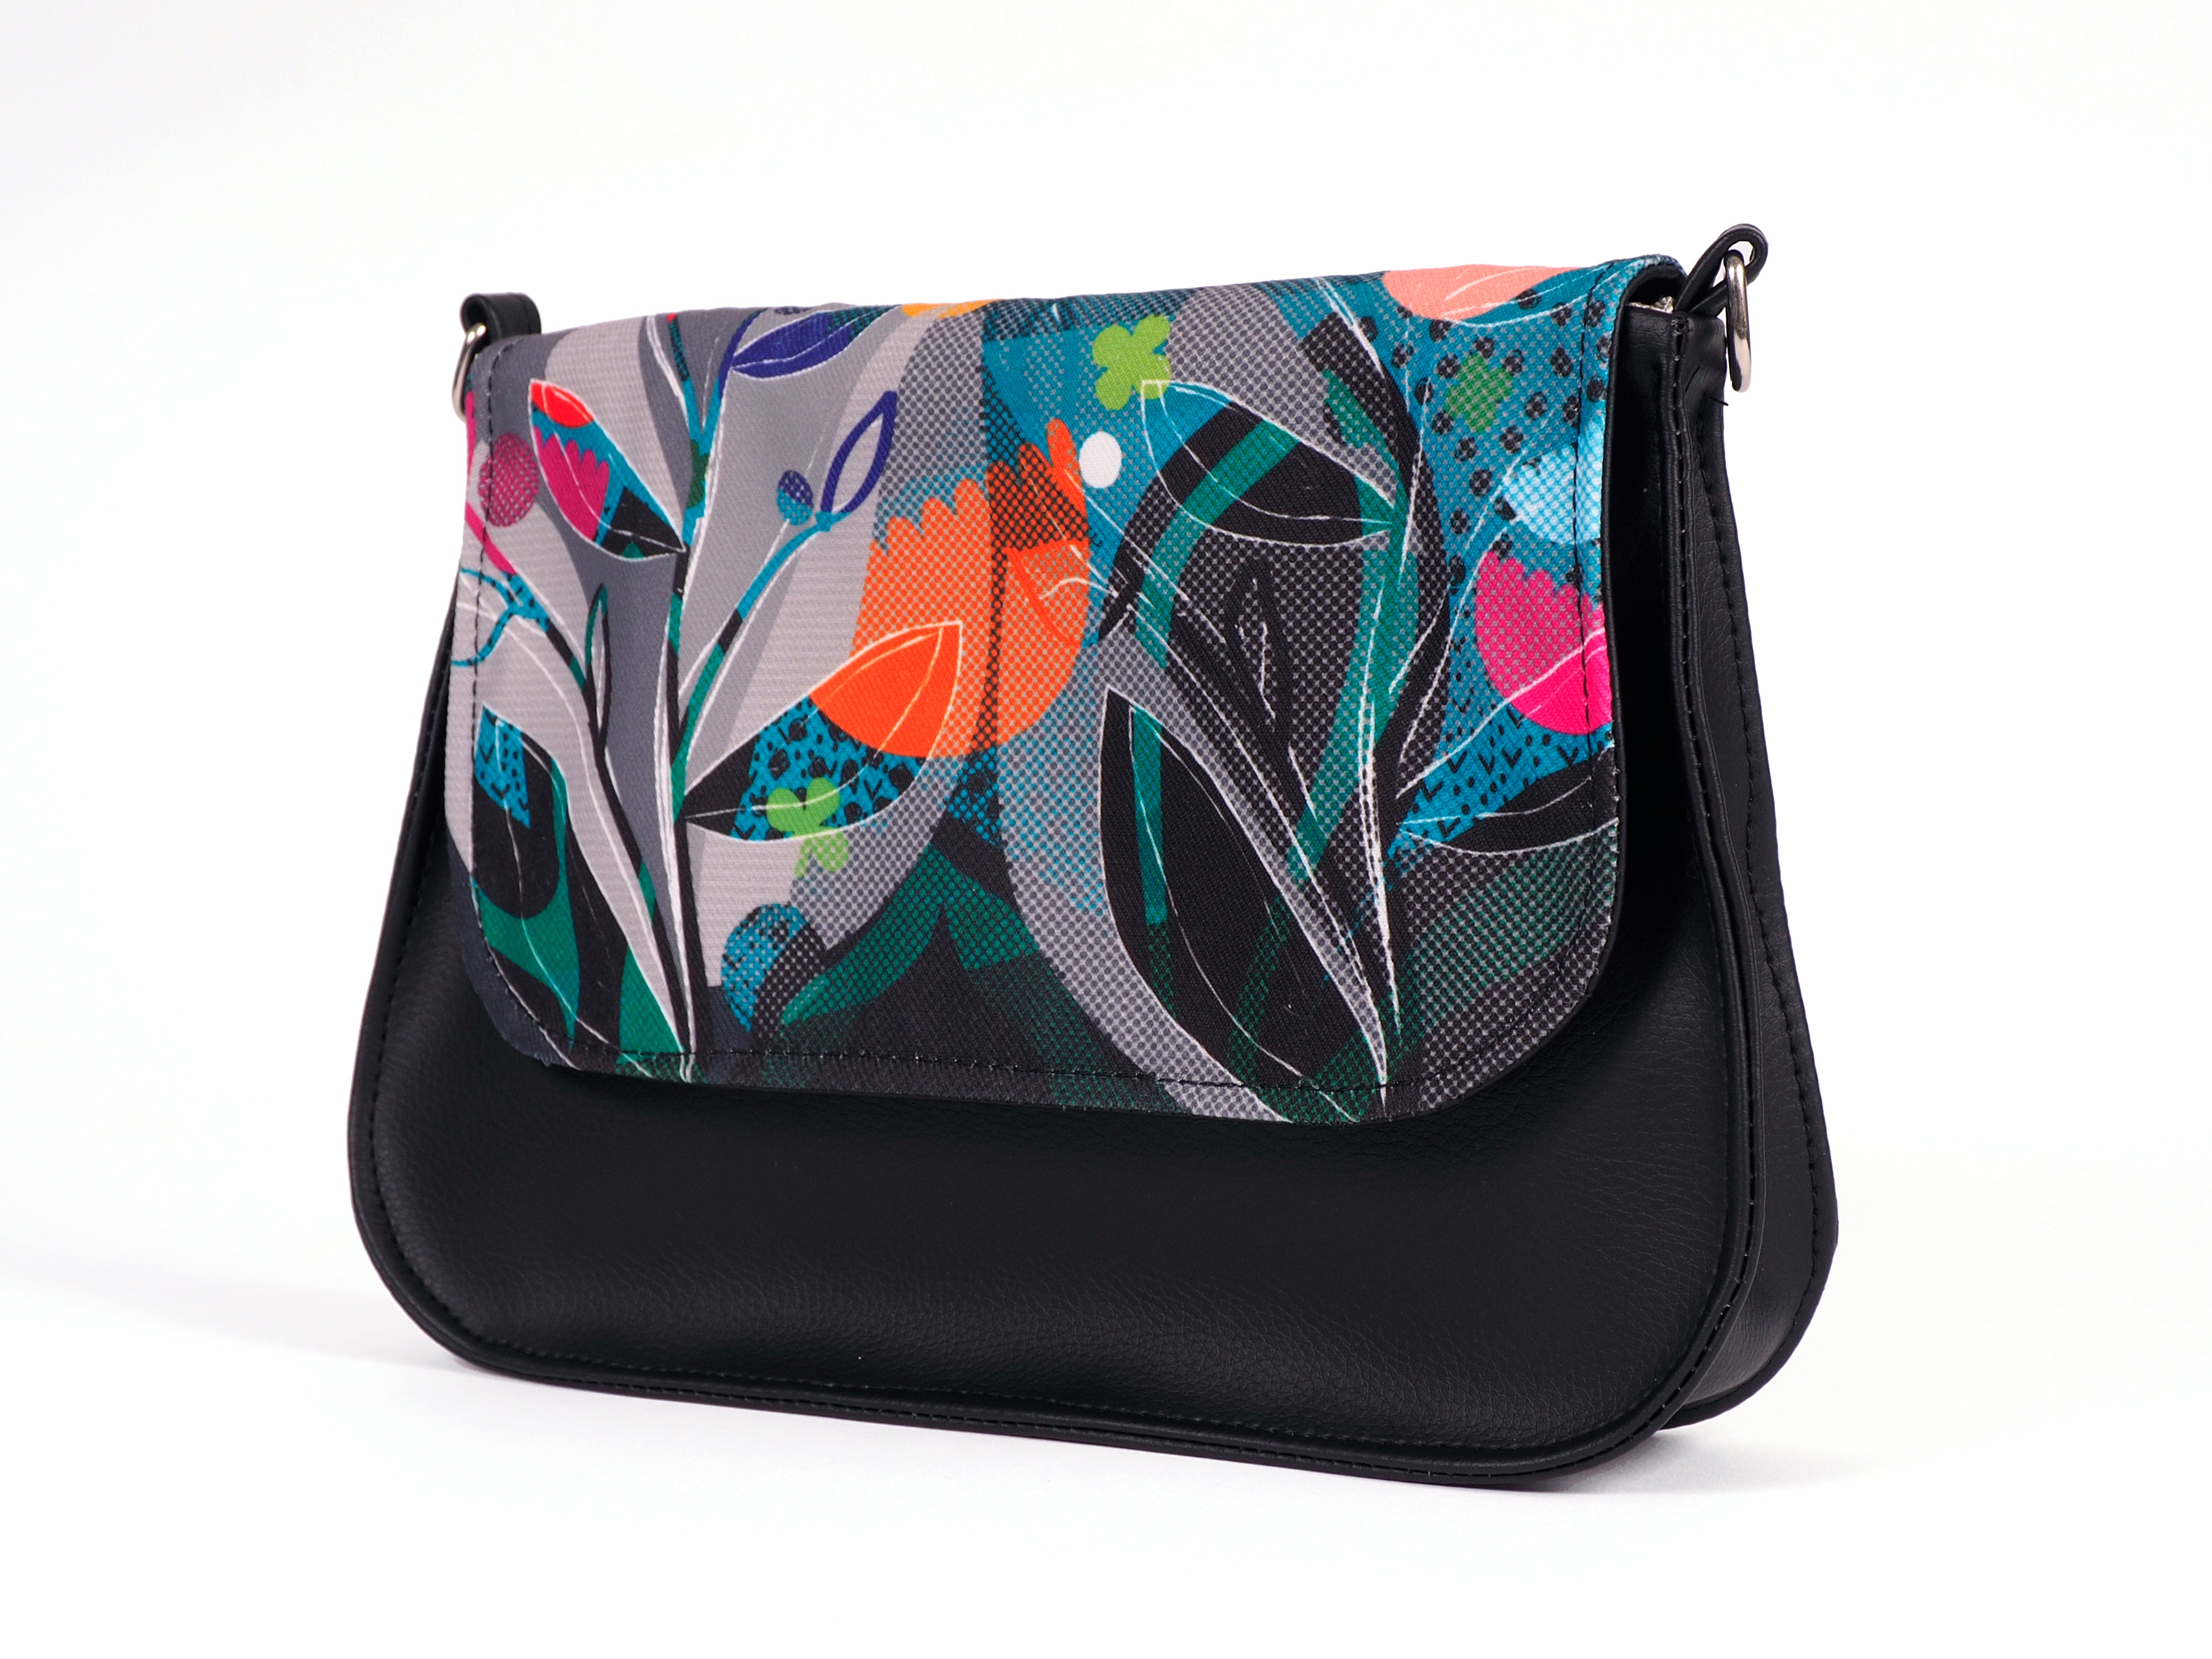 Bardo box bag - Waiting for the dawn - Premium bardo box bag from vintage garden - Just lvblack, floral, flowers, gift, gray, green, handemade, leaves, nature, ping, vegan leather, Waiting for the dawn, woman52.00! Shop now at BARDO ART WORKS